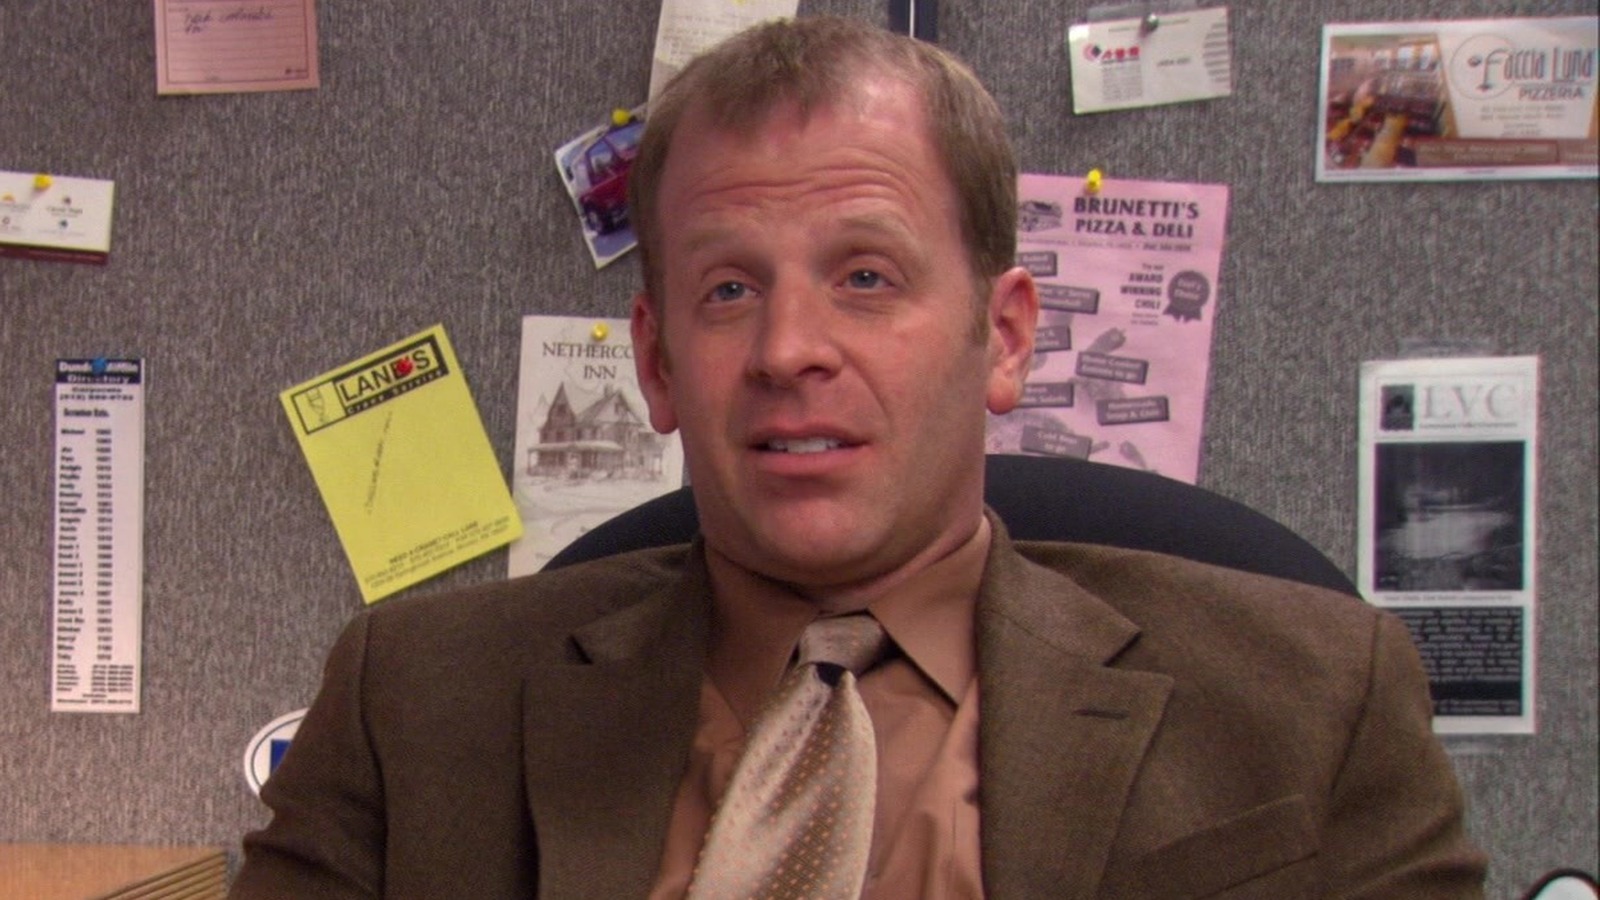 The Ultimate Office Theory Reveals the Shocking Reason Behind Toby’s Firing in the Finale